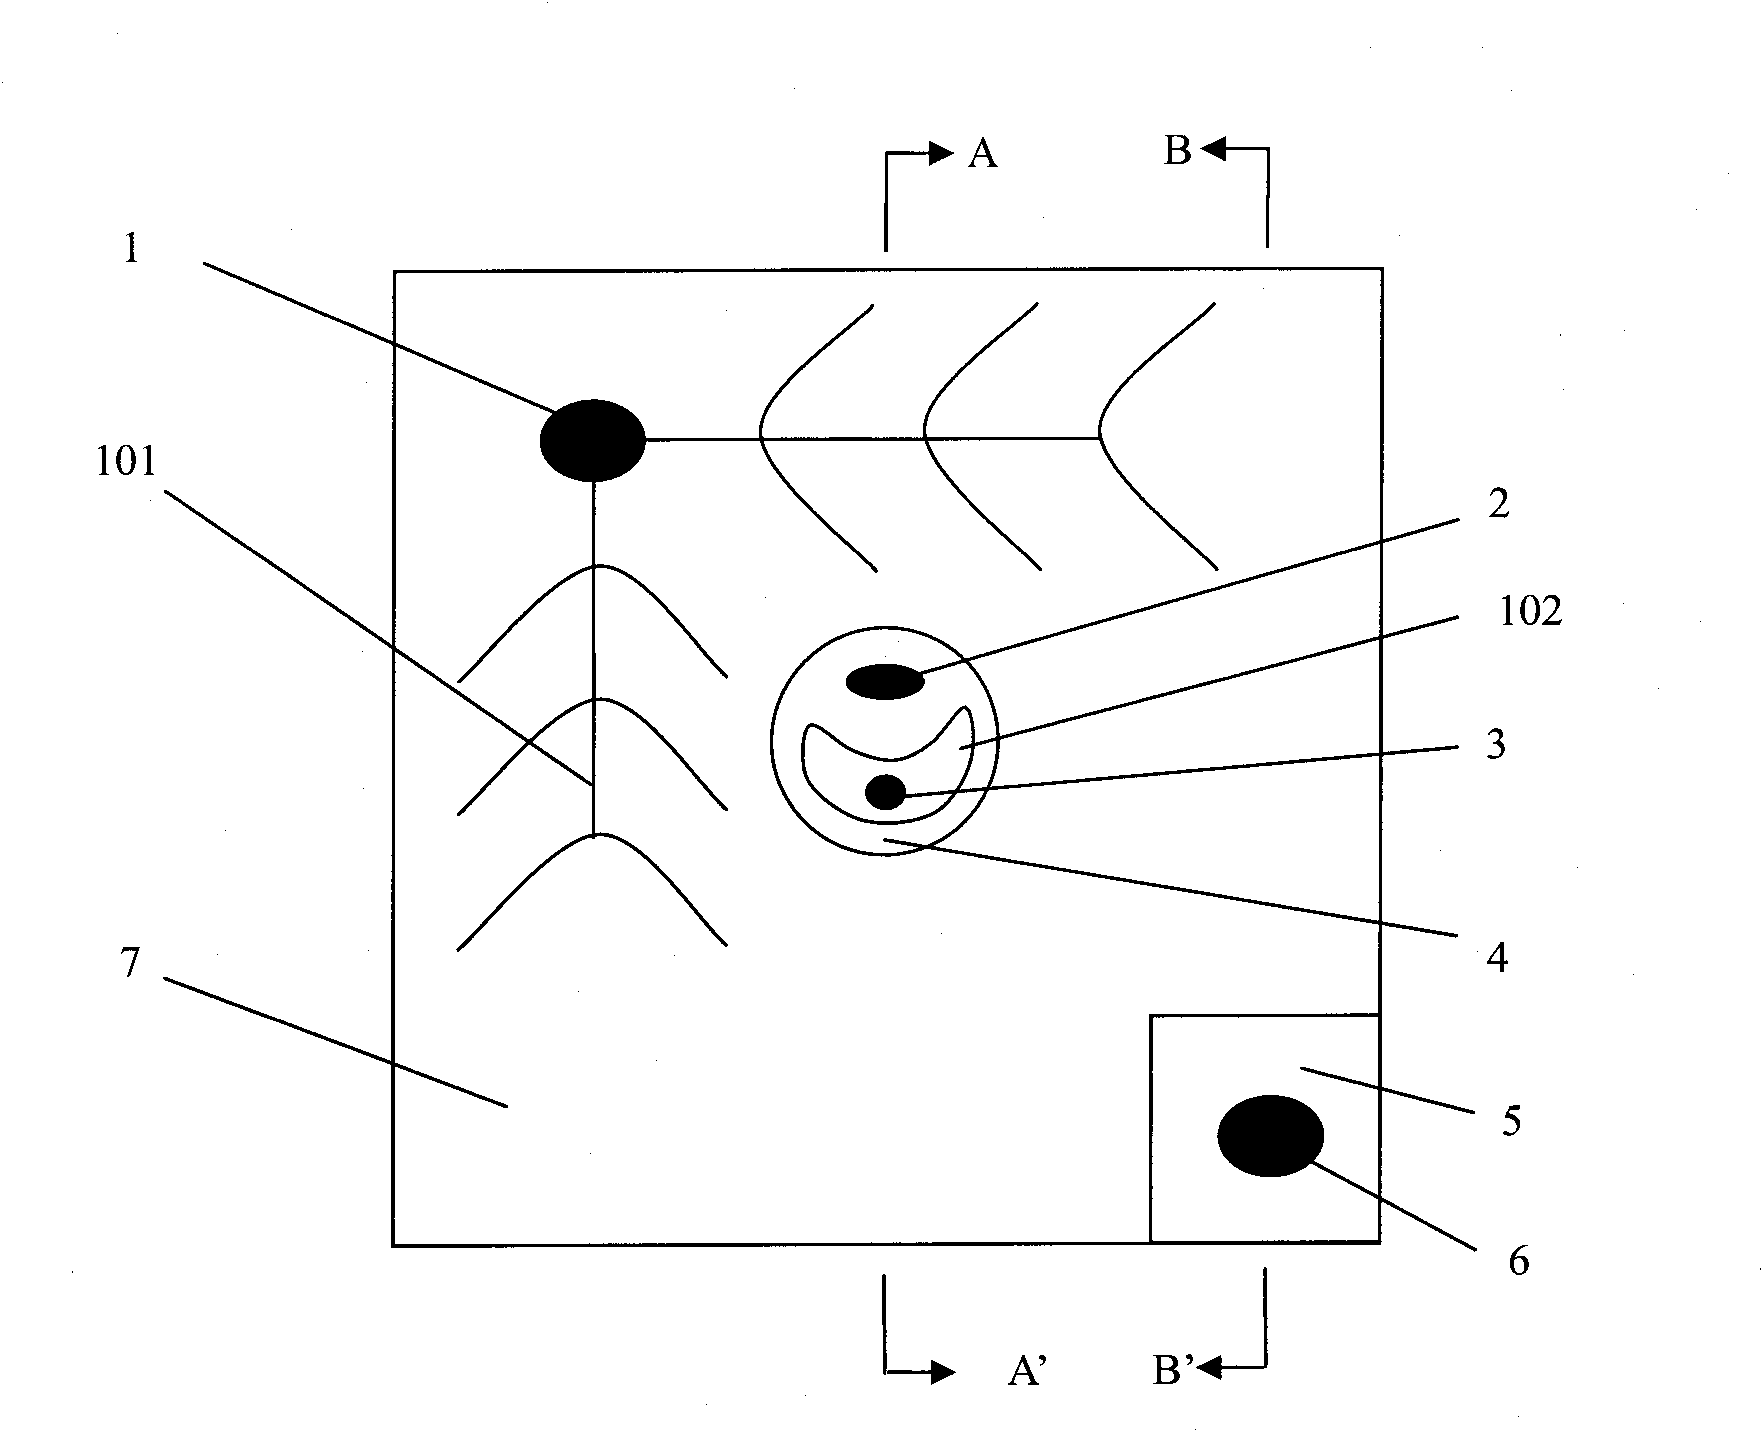 High-power LED (light-emitting diode) with Schottky diode for measuring temperature